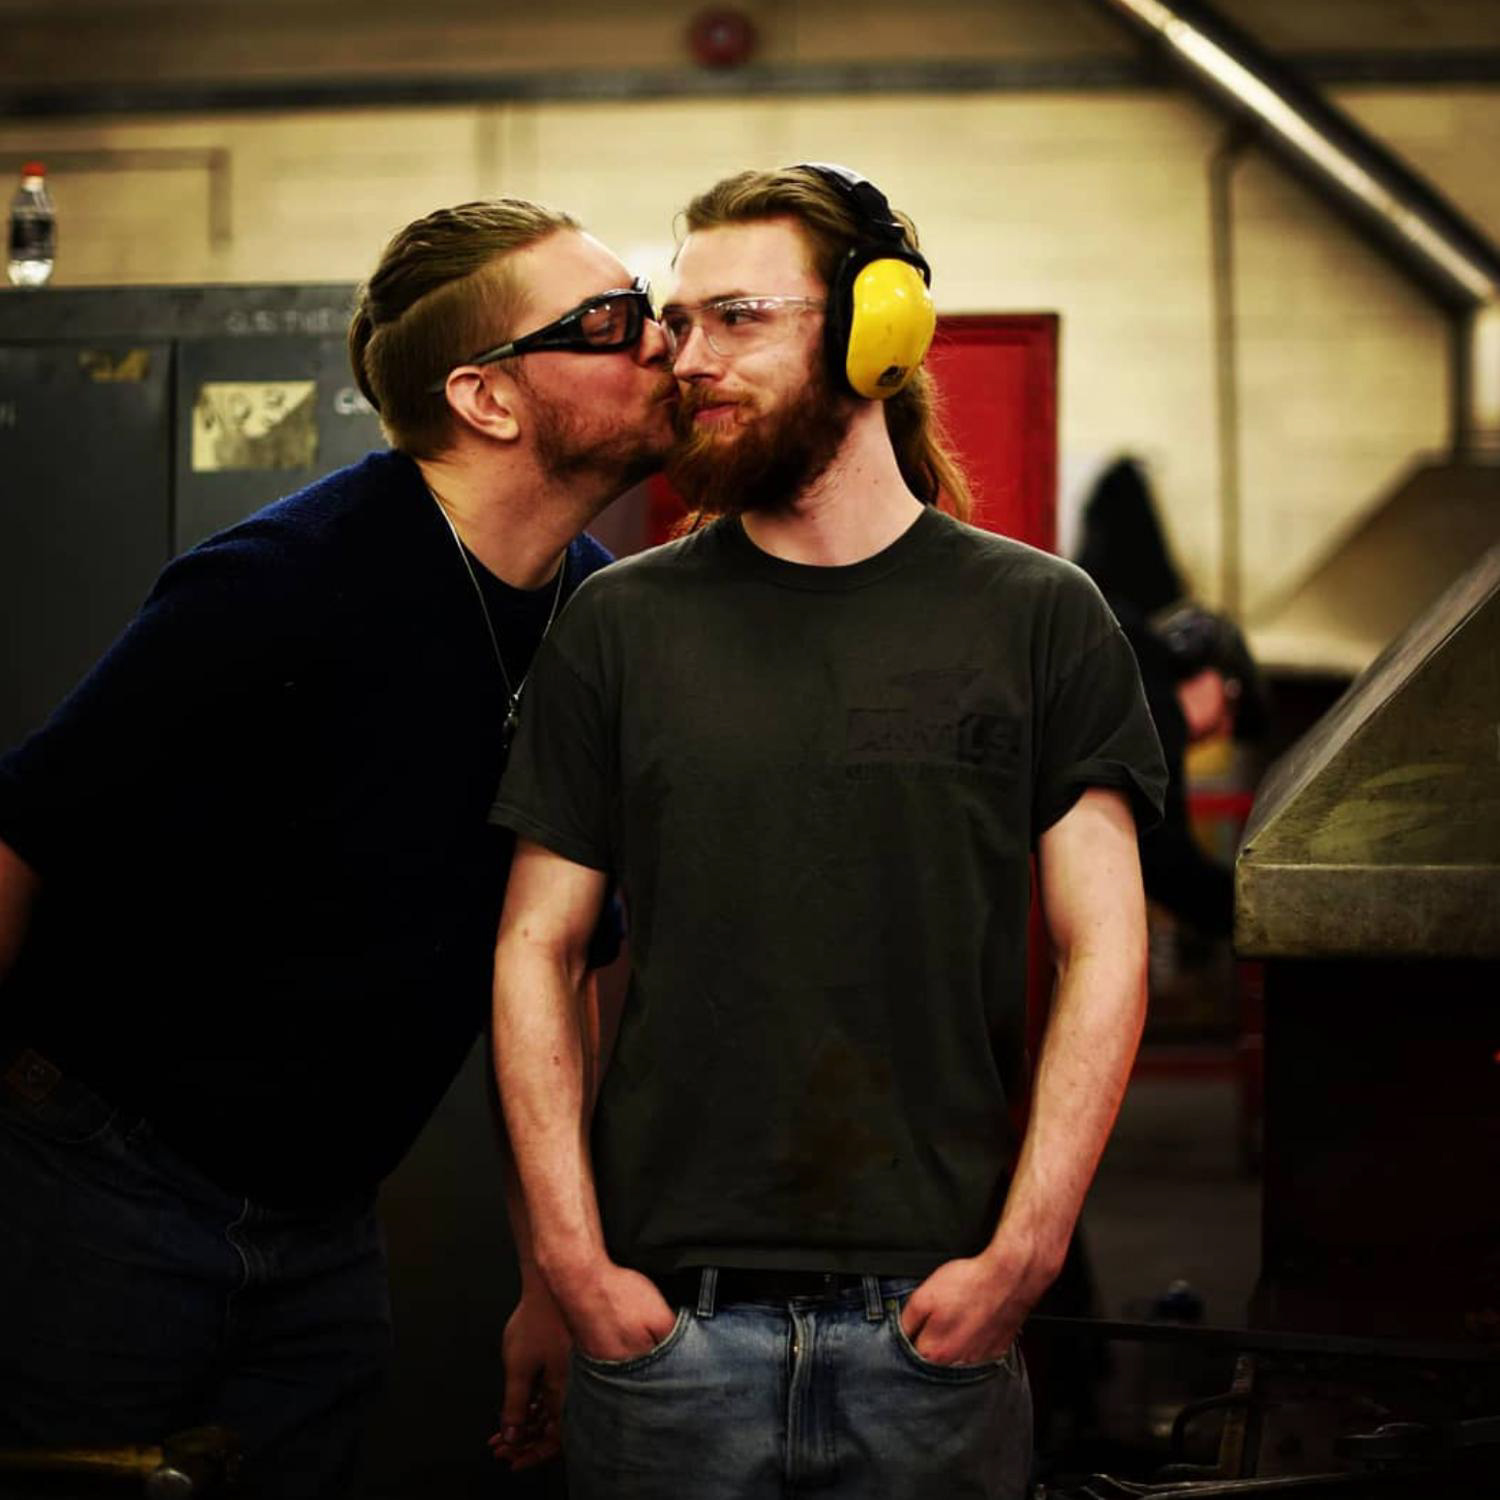 Two bearded figures wearing safety glasses and dark shirts stand in a workspace, one leans in to plant a friendly kiss on the other's cheek